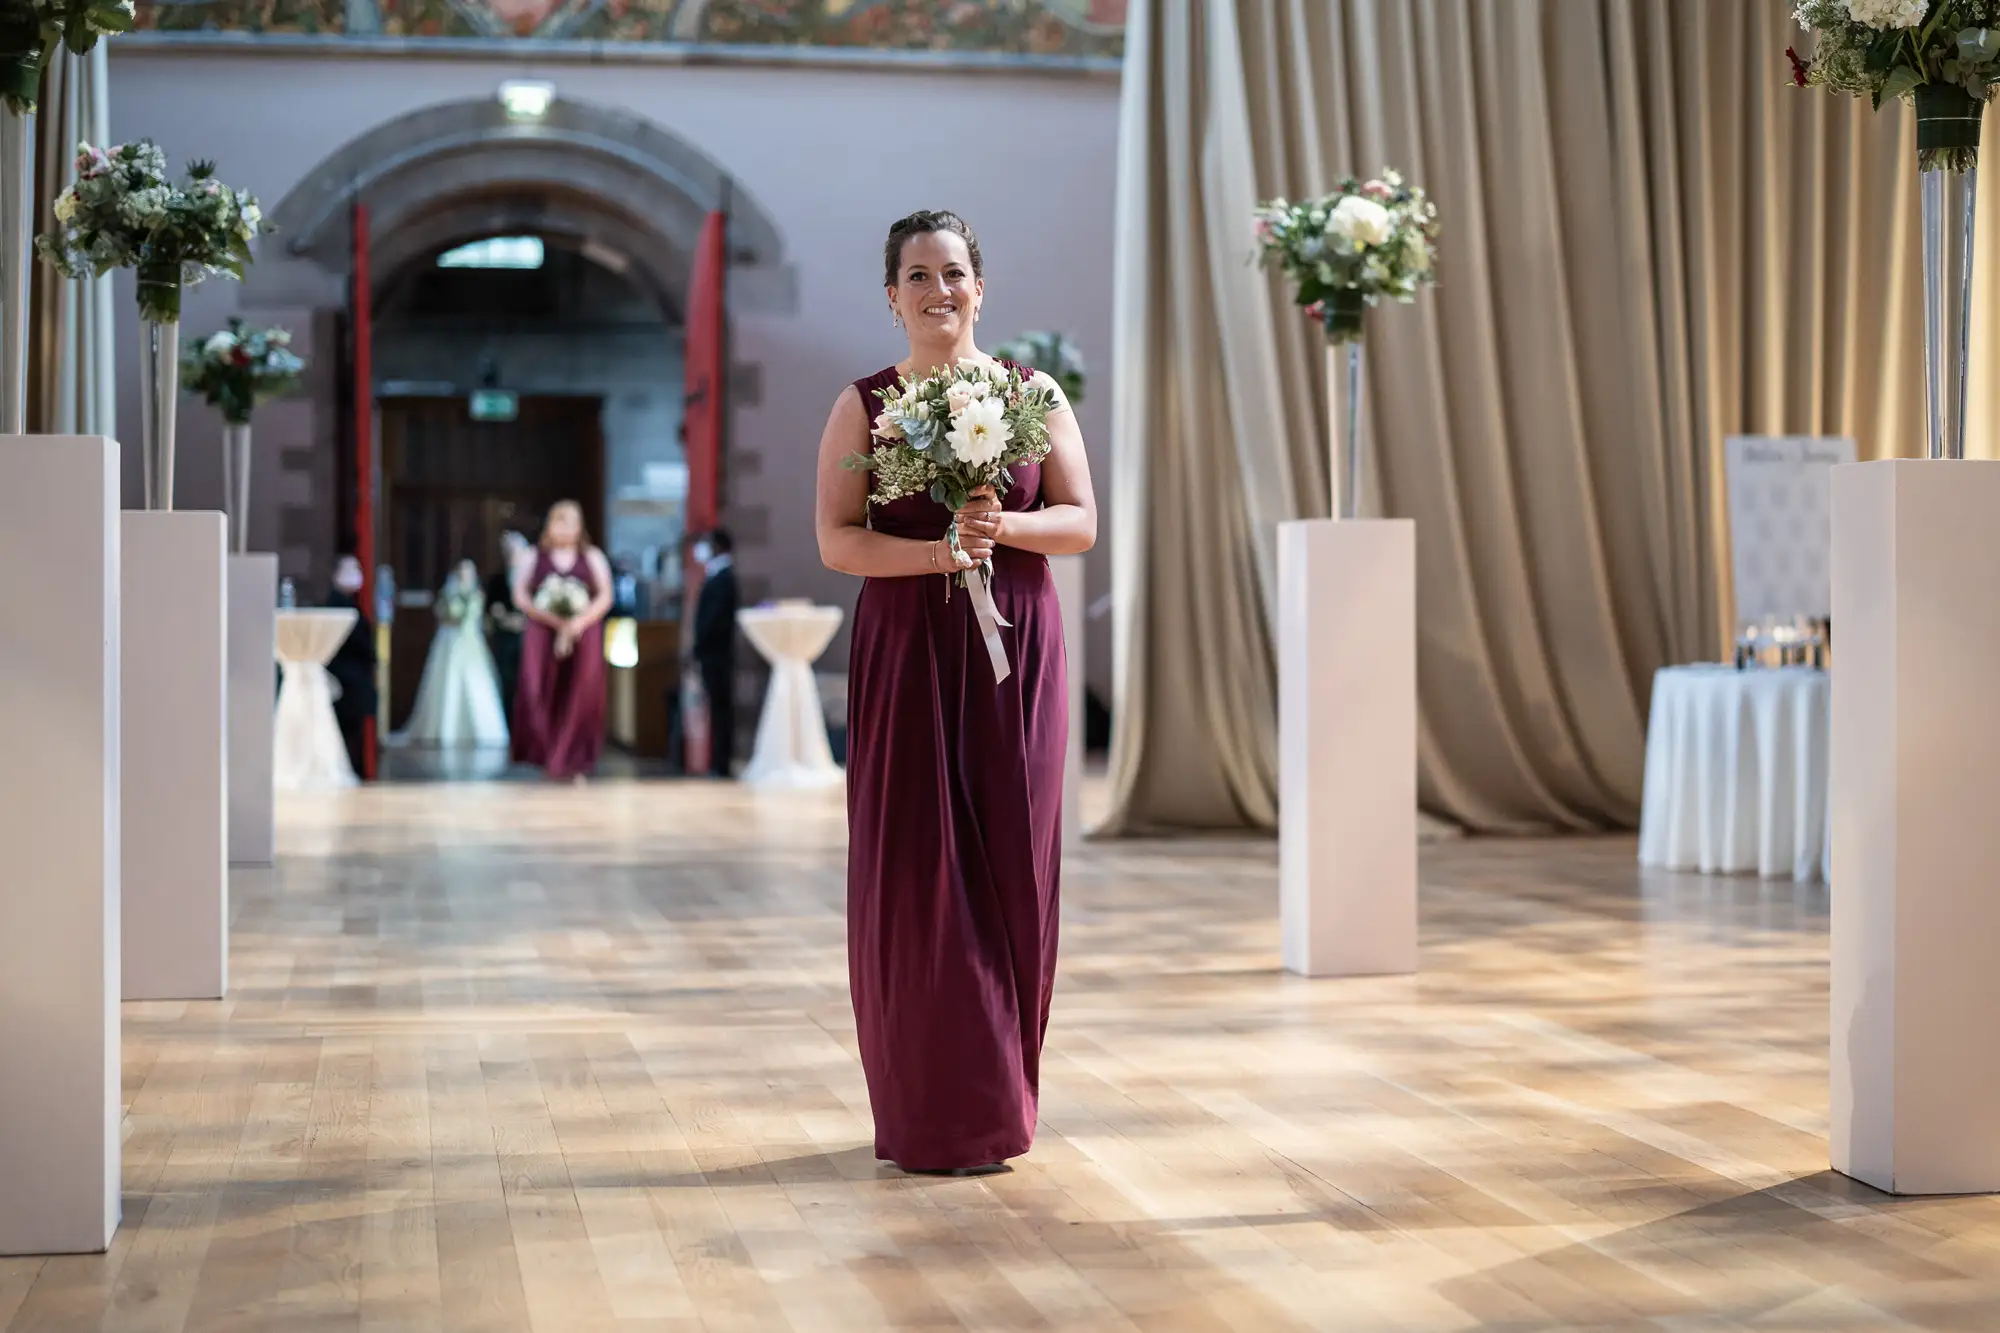 A woman in a burgundy dress smiling and holding a bouquet at a wedding ceremony in an elegant hall.